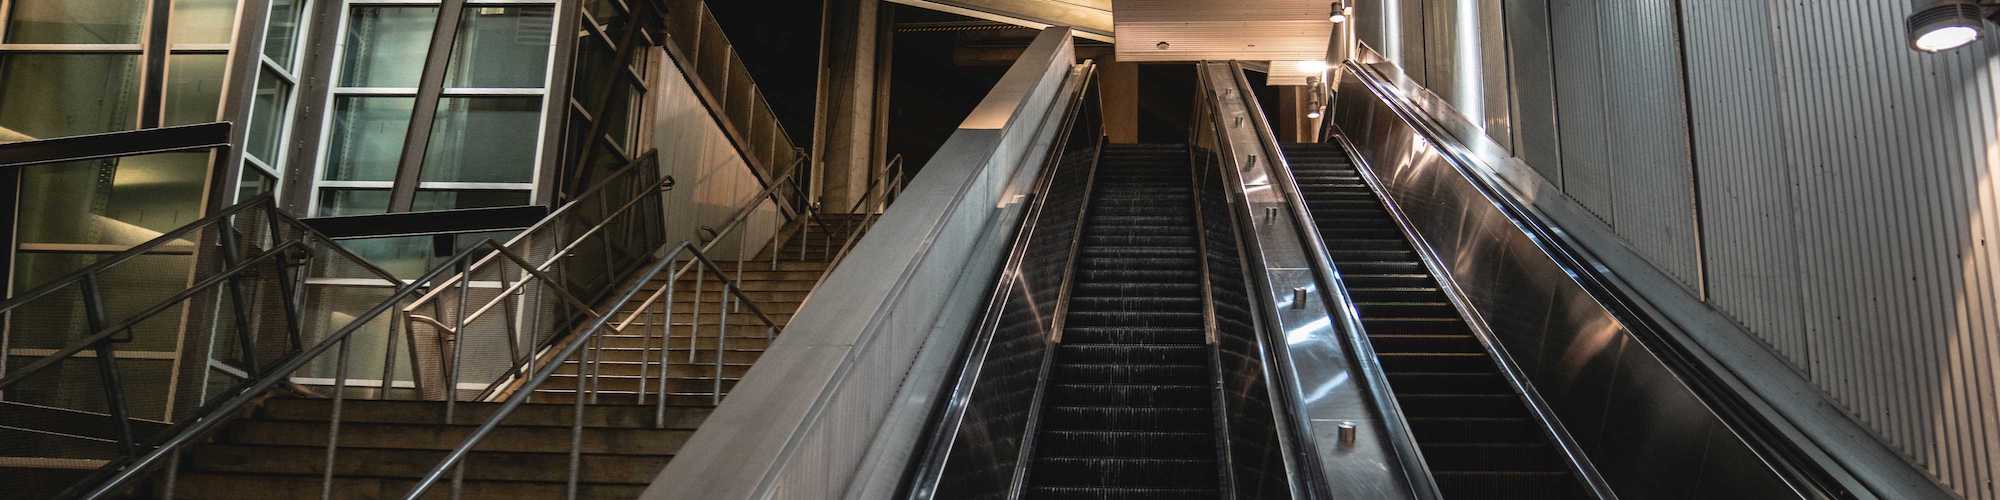 Downtown Escalator Project